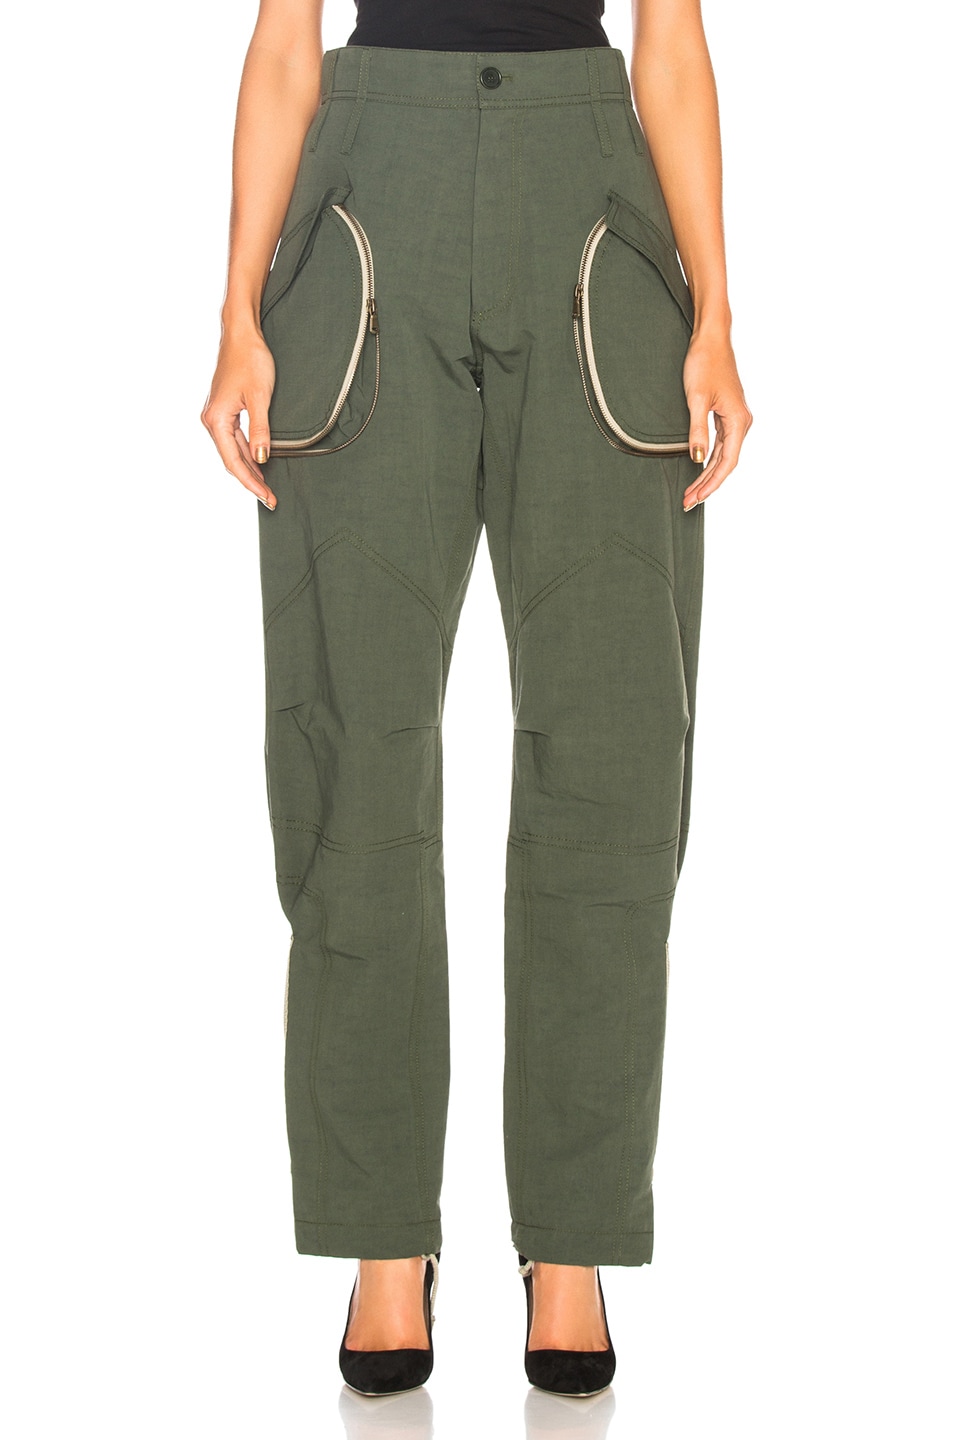 Image 1 of TRE by Natalie Ratabesi Giovanna Pant in Moss Green